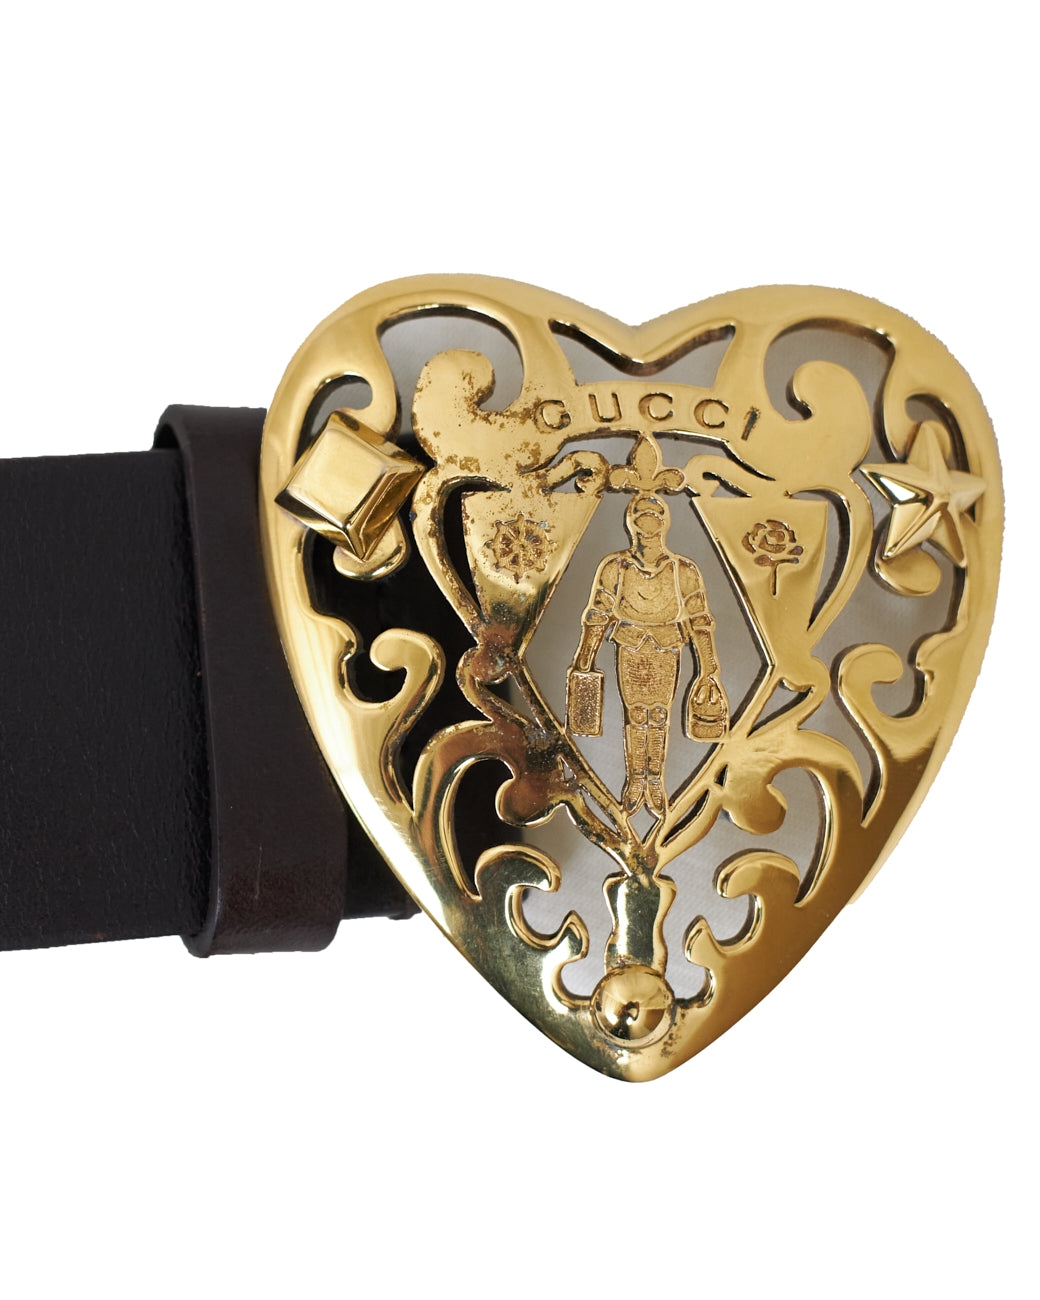 Gucci Brown Leather Heart Belt - size 36